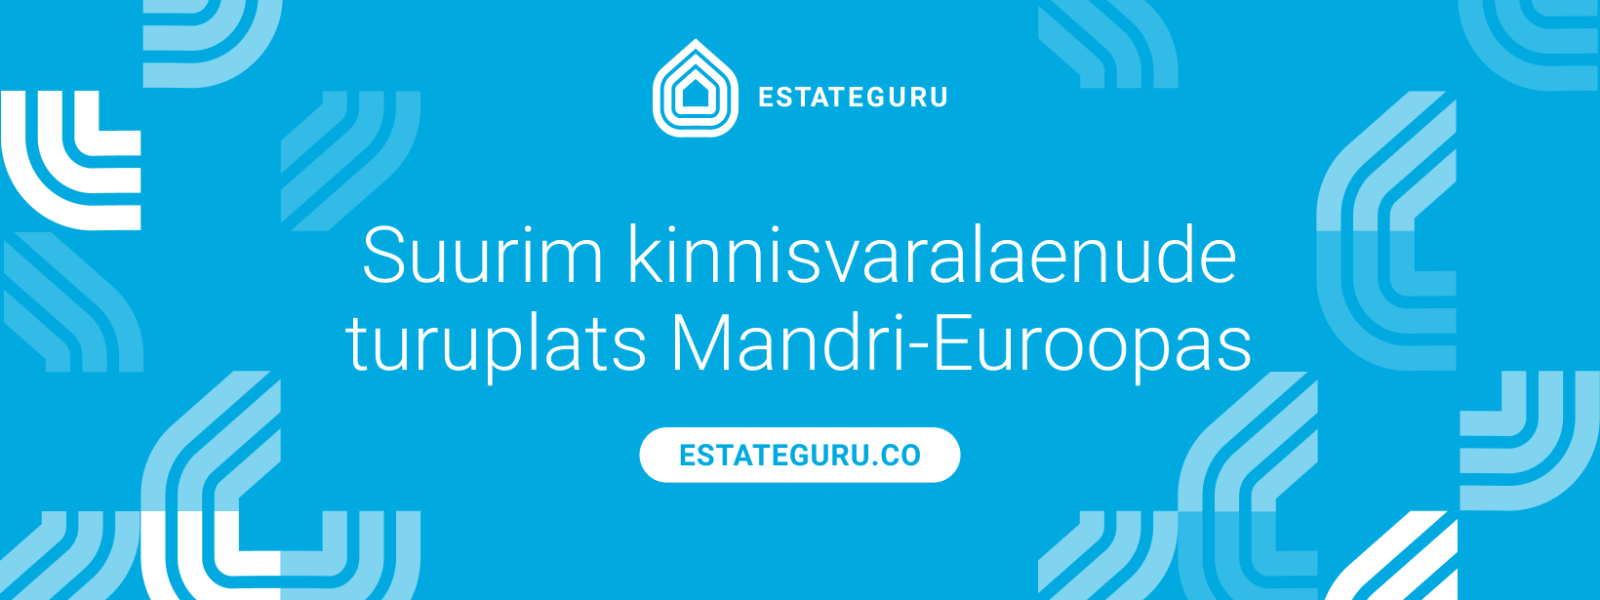 ESTATEGURU OÜ - Invest in thousands of loans to businesses across Europe, all backed by the peace of mind provided by a m...